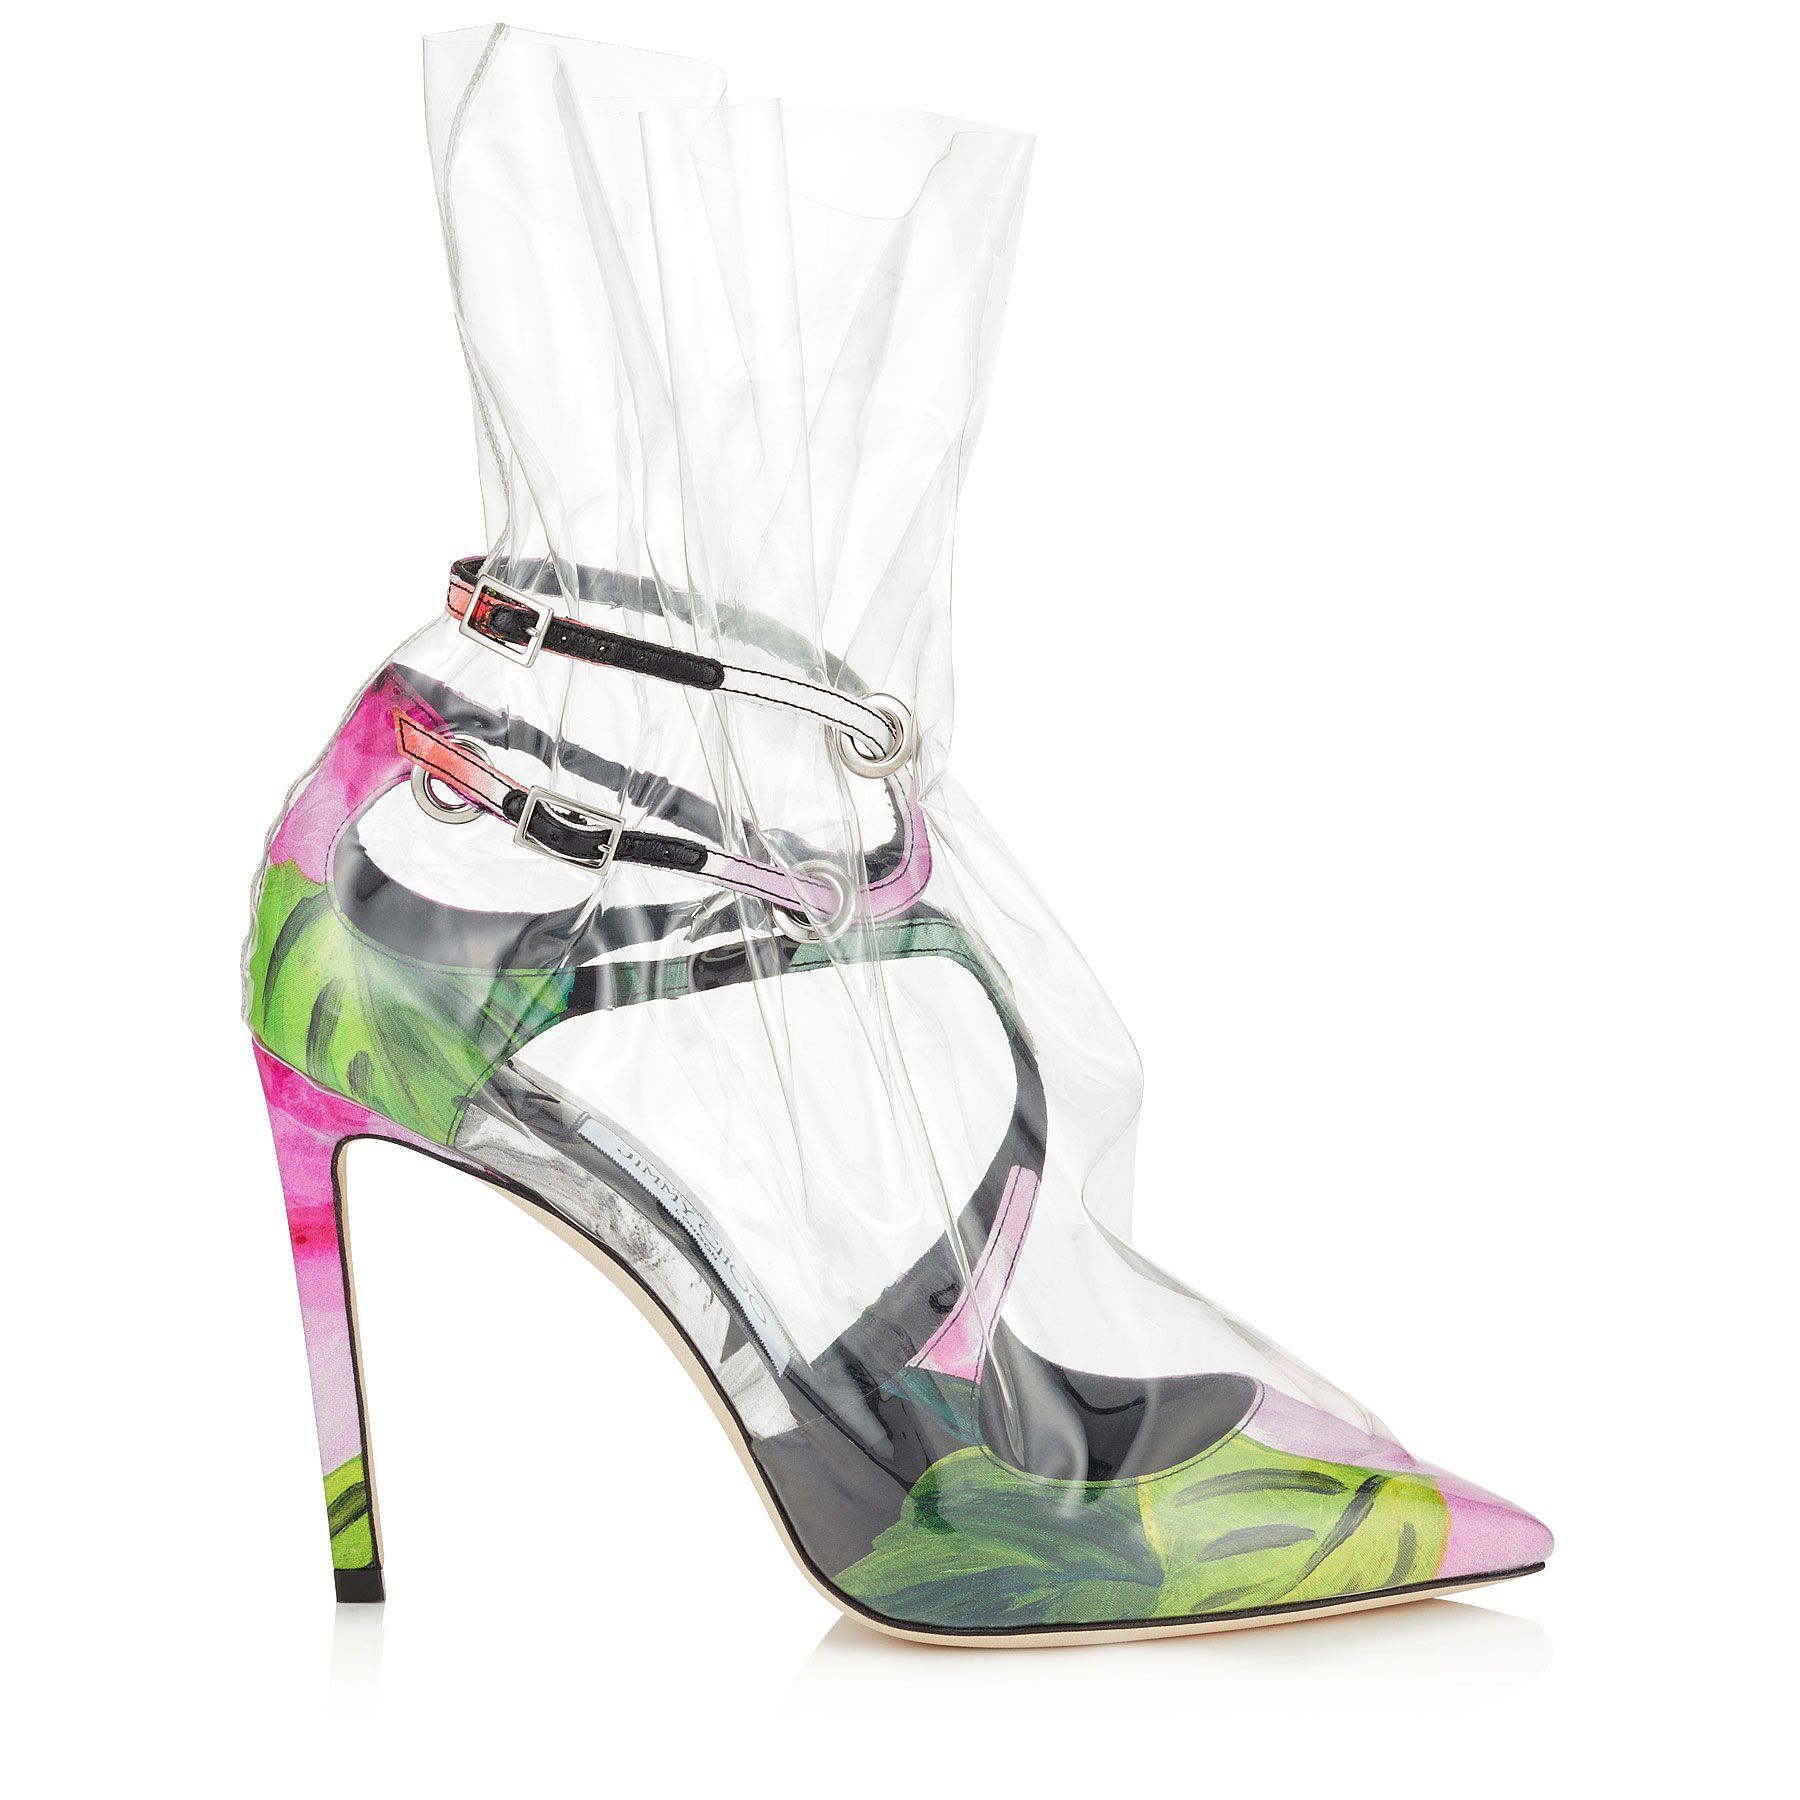 Off-White's Plastic Fantastic Jimmy Choo Collection Has Arrived